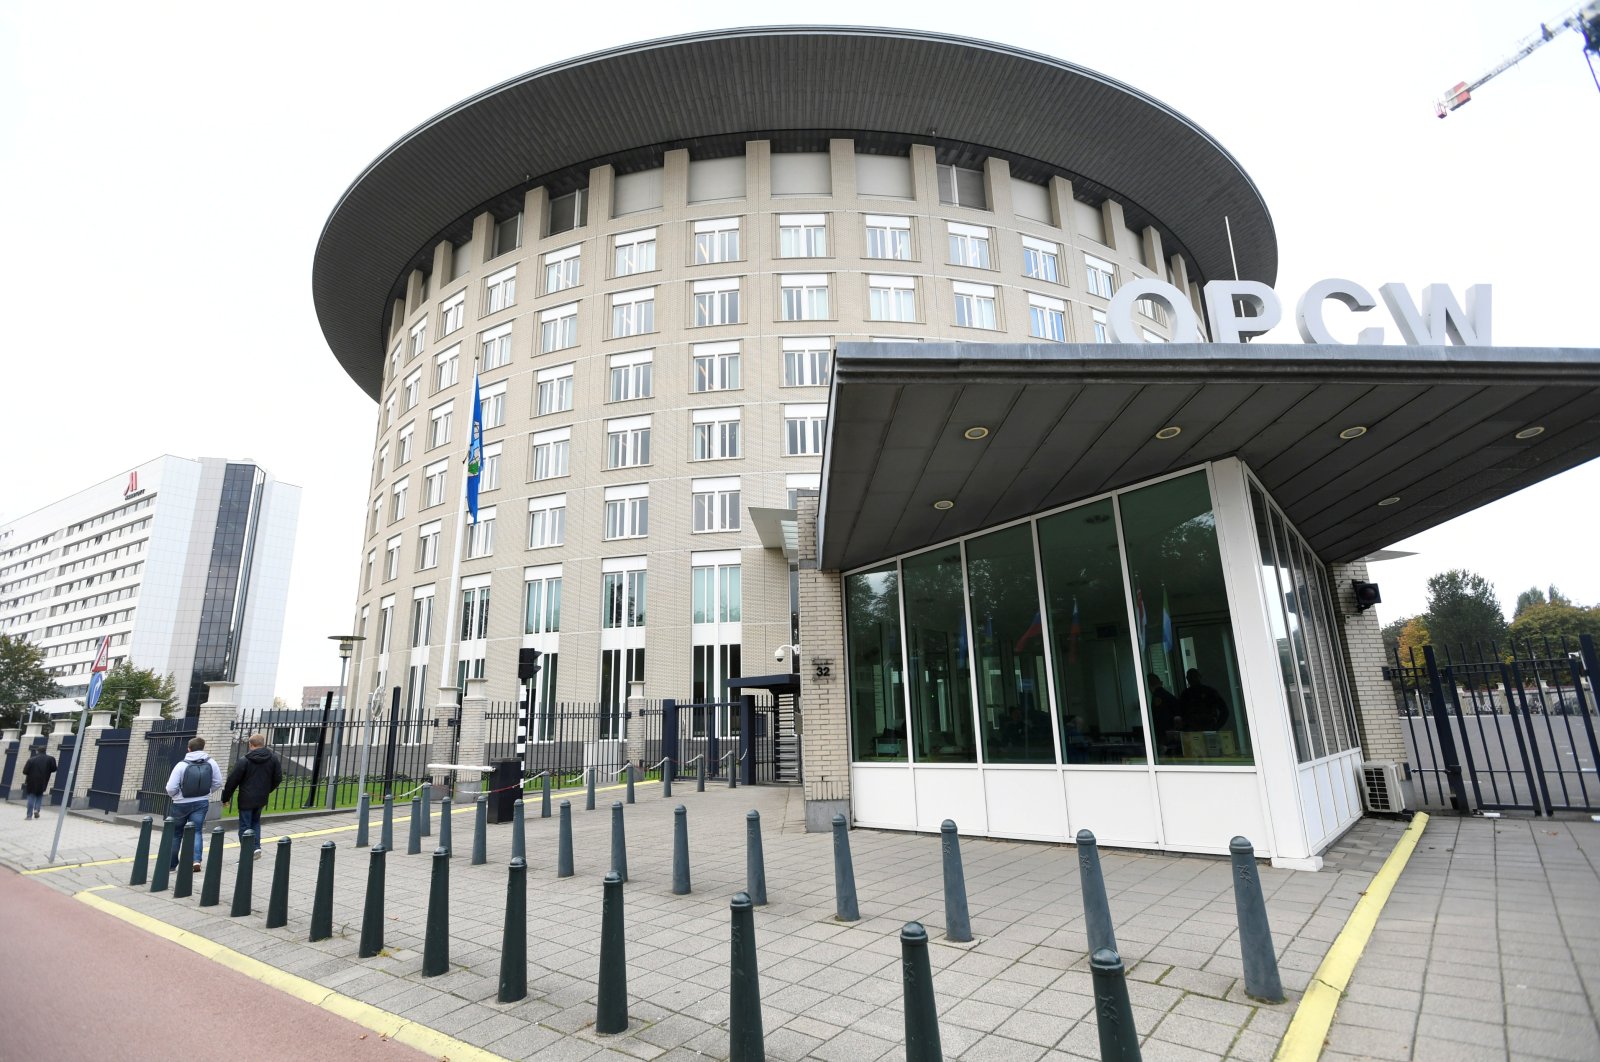 The headquarters of the Organization for the Prohibition of Chemical Weapons (OPCW) is pictured in The Hague, Netherlands, Oct. 4, 2018. (Reuters Photo)